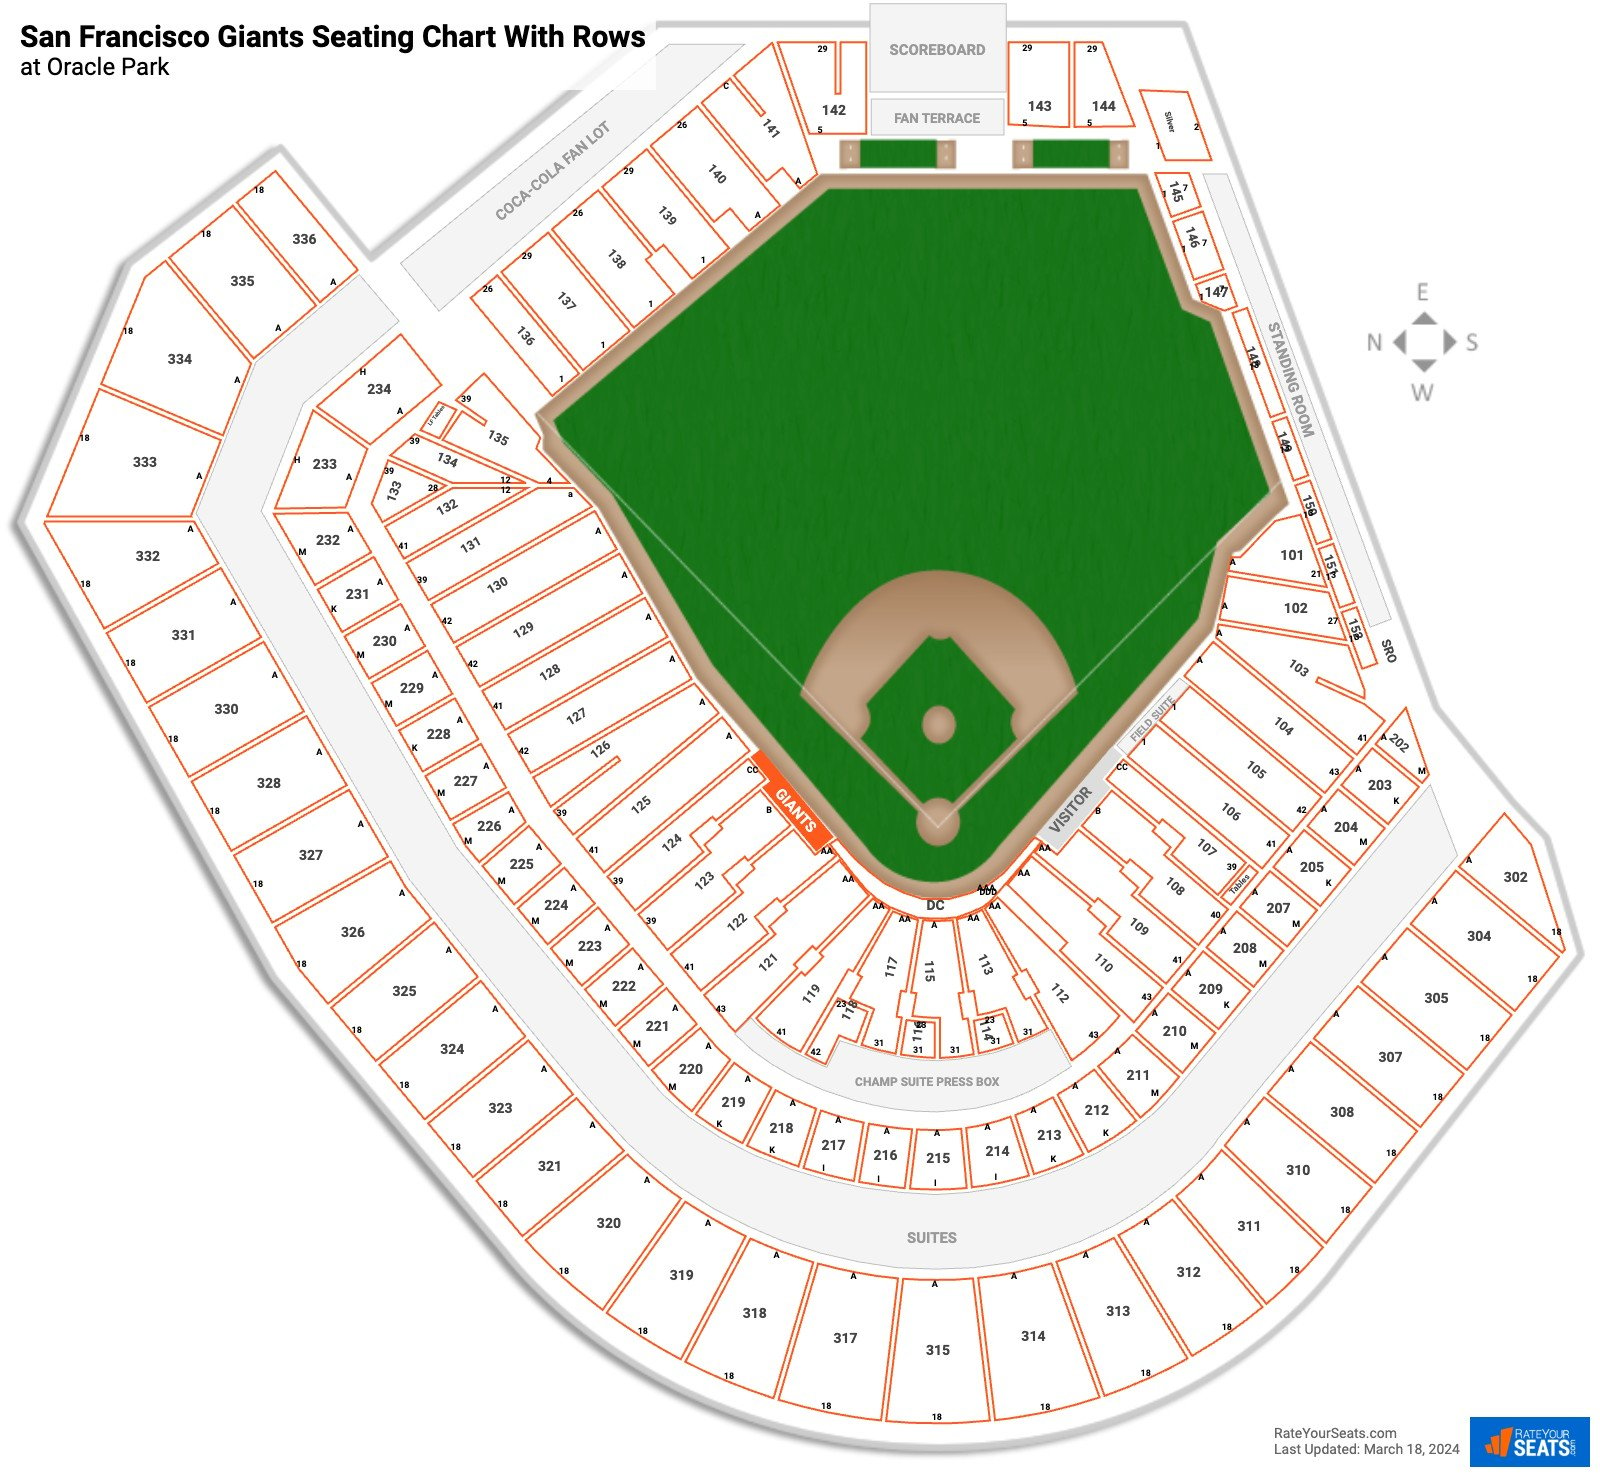 Oracle Park seating chart with row numbers